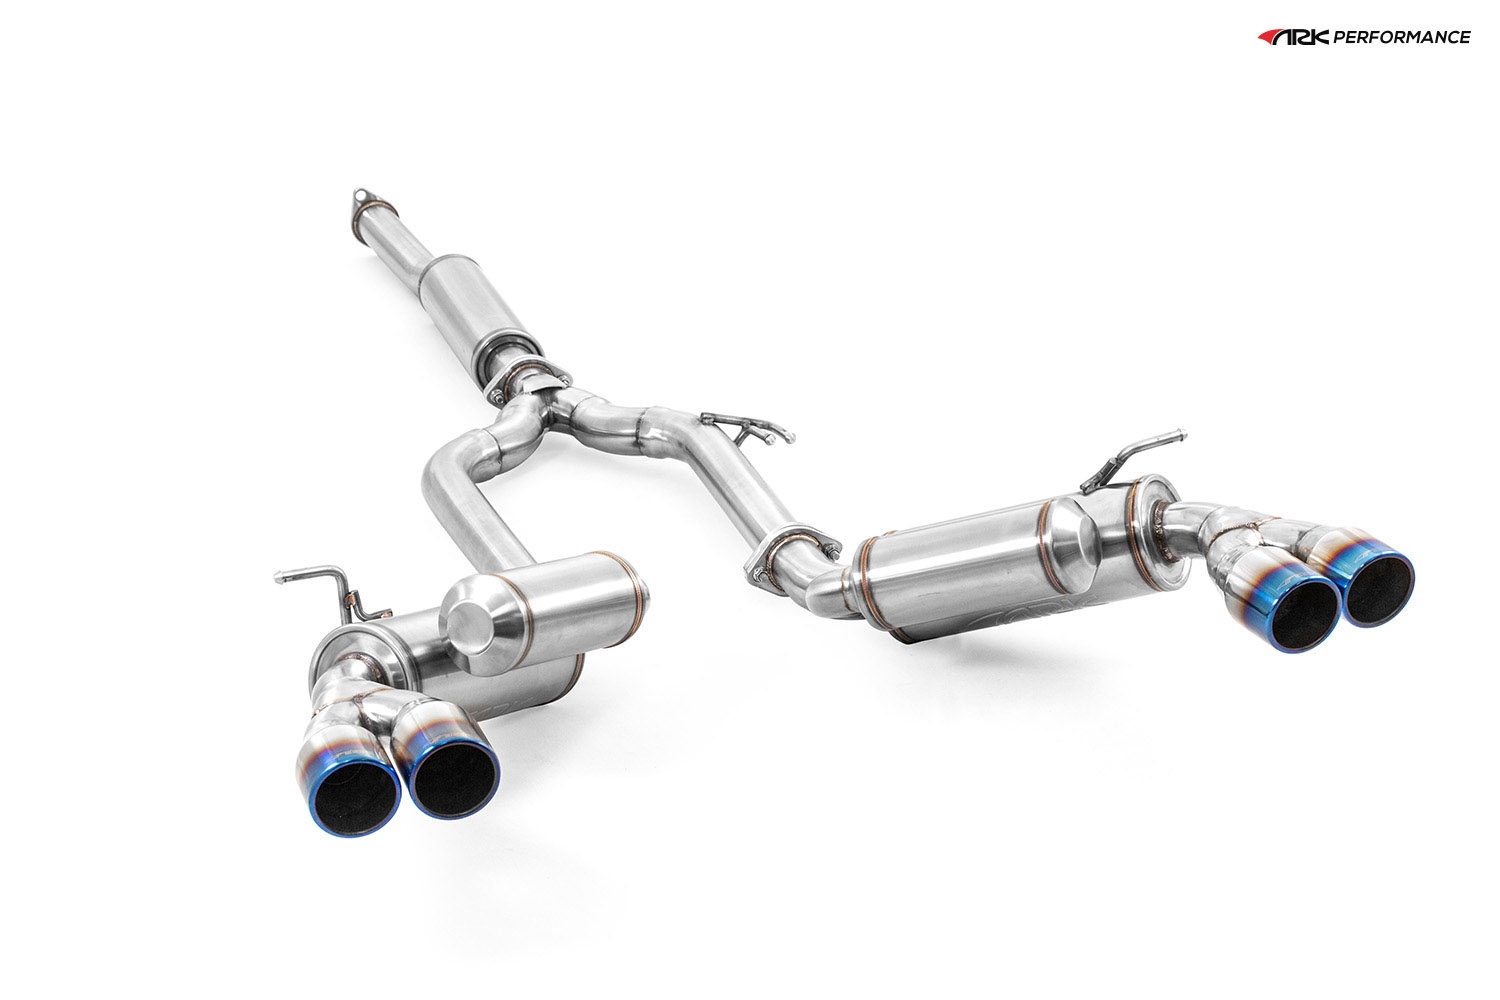 Ark Performance Stainless Steel GRiP Cat-Back Exhaust System 2.5in Pipe w/ 3.5 Burnt Quad Tip , Dual Exit - Hyundai Genesis Coupe 10-14 2.0T BK1, BK2